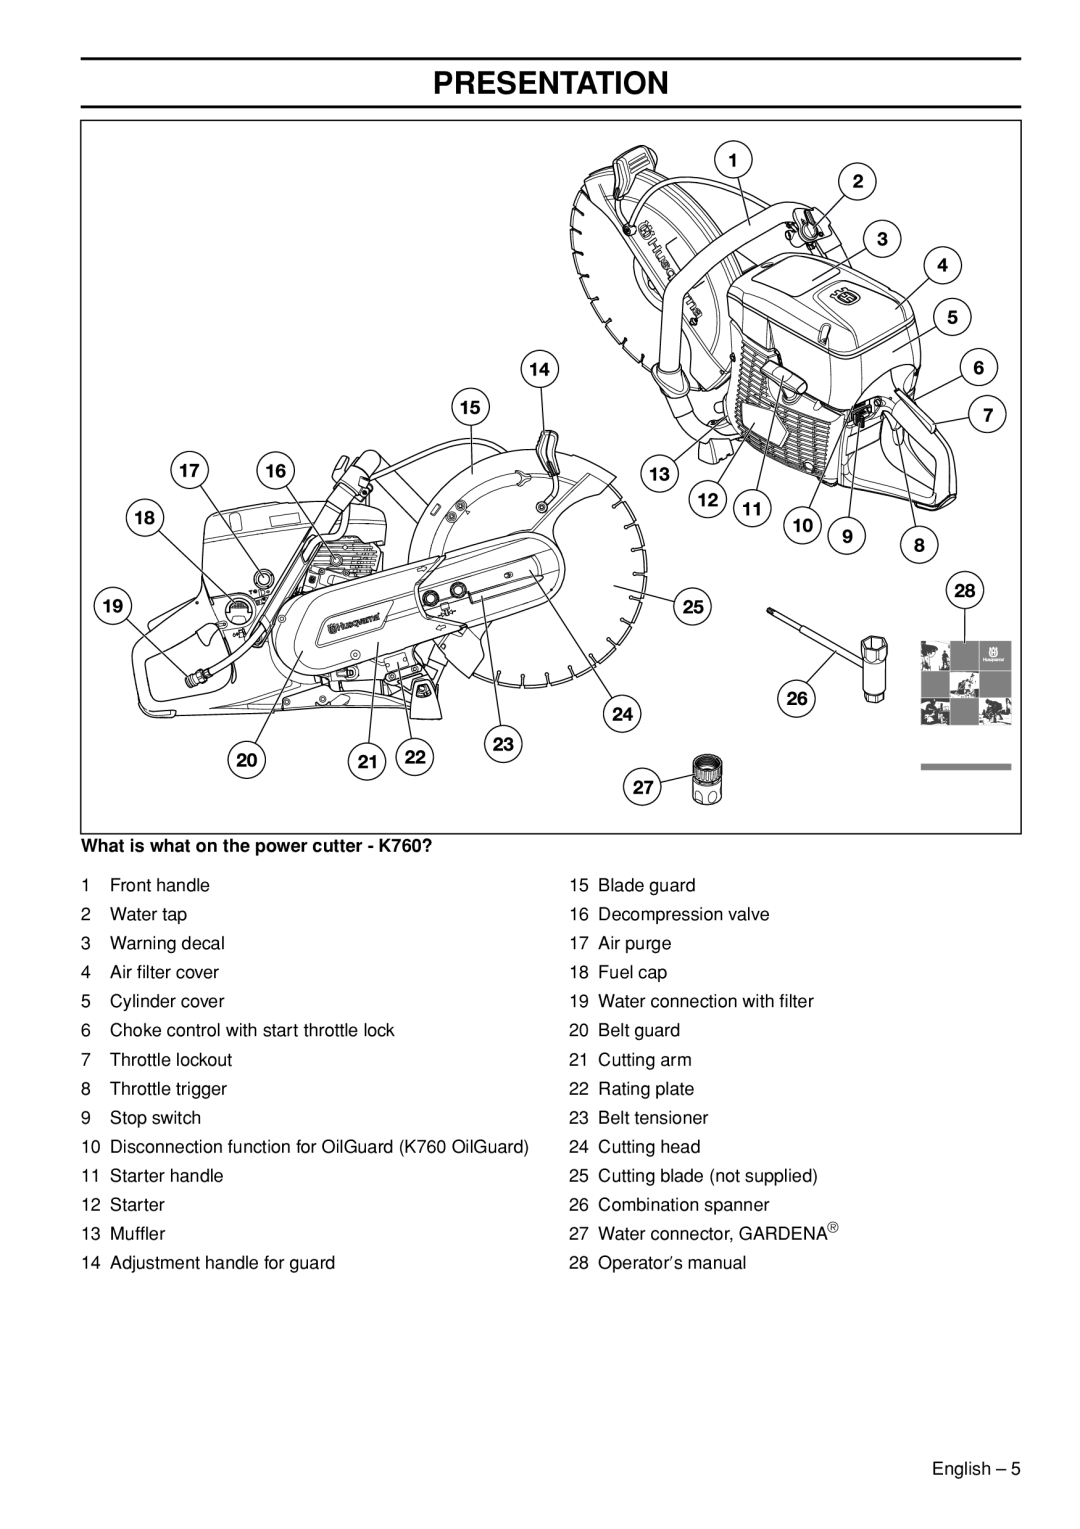 Husqvarna K760 Rescue manual Presentation, What is what on the power cutter - K760? 